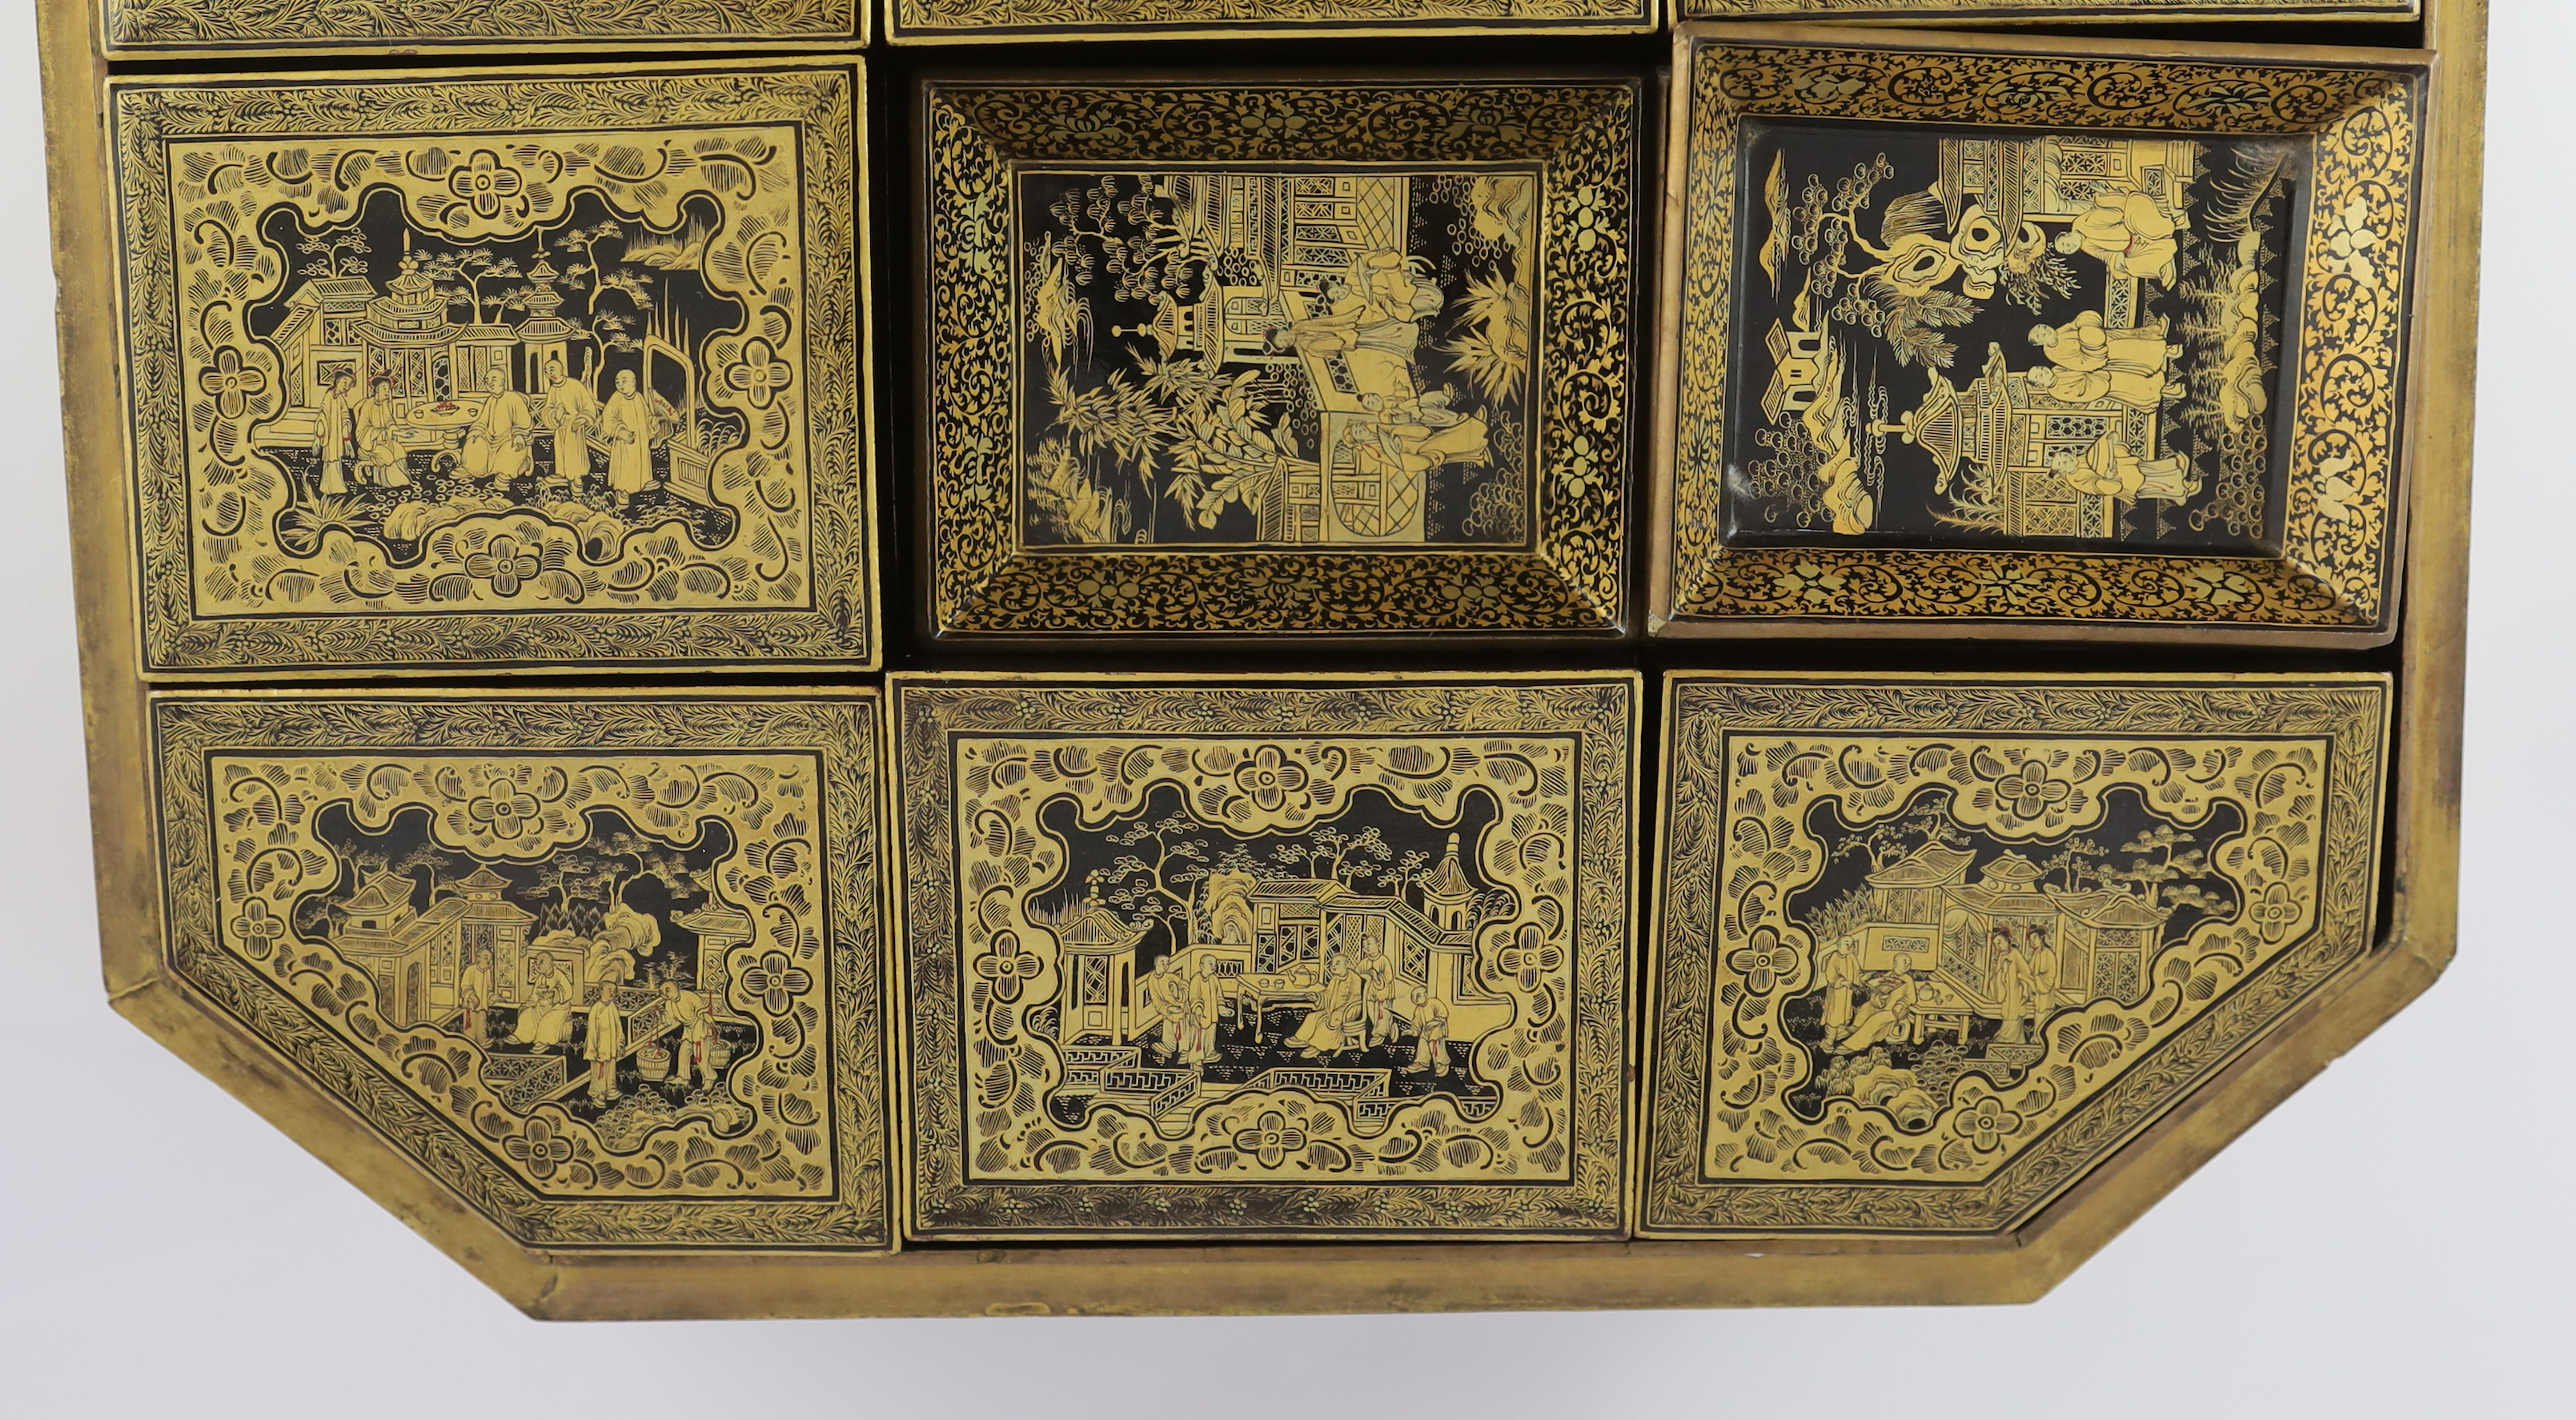 A Chinese Export gilt-decorated black lacquer games box, c.1830, decorated with figures amid - Image 7 of 7